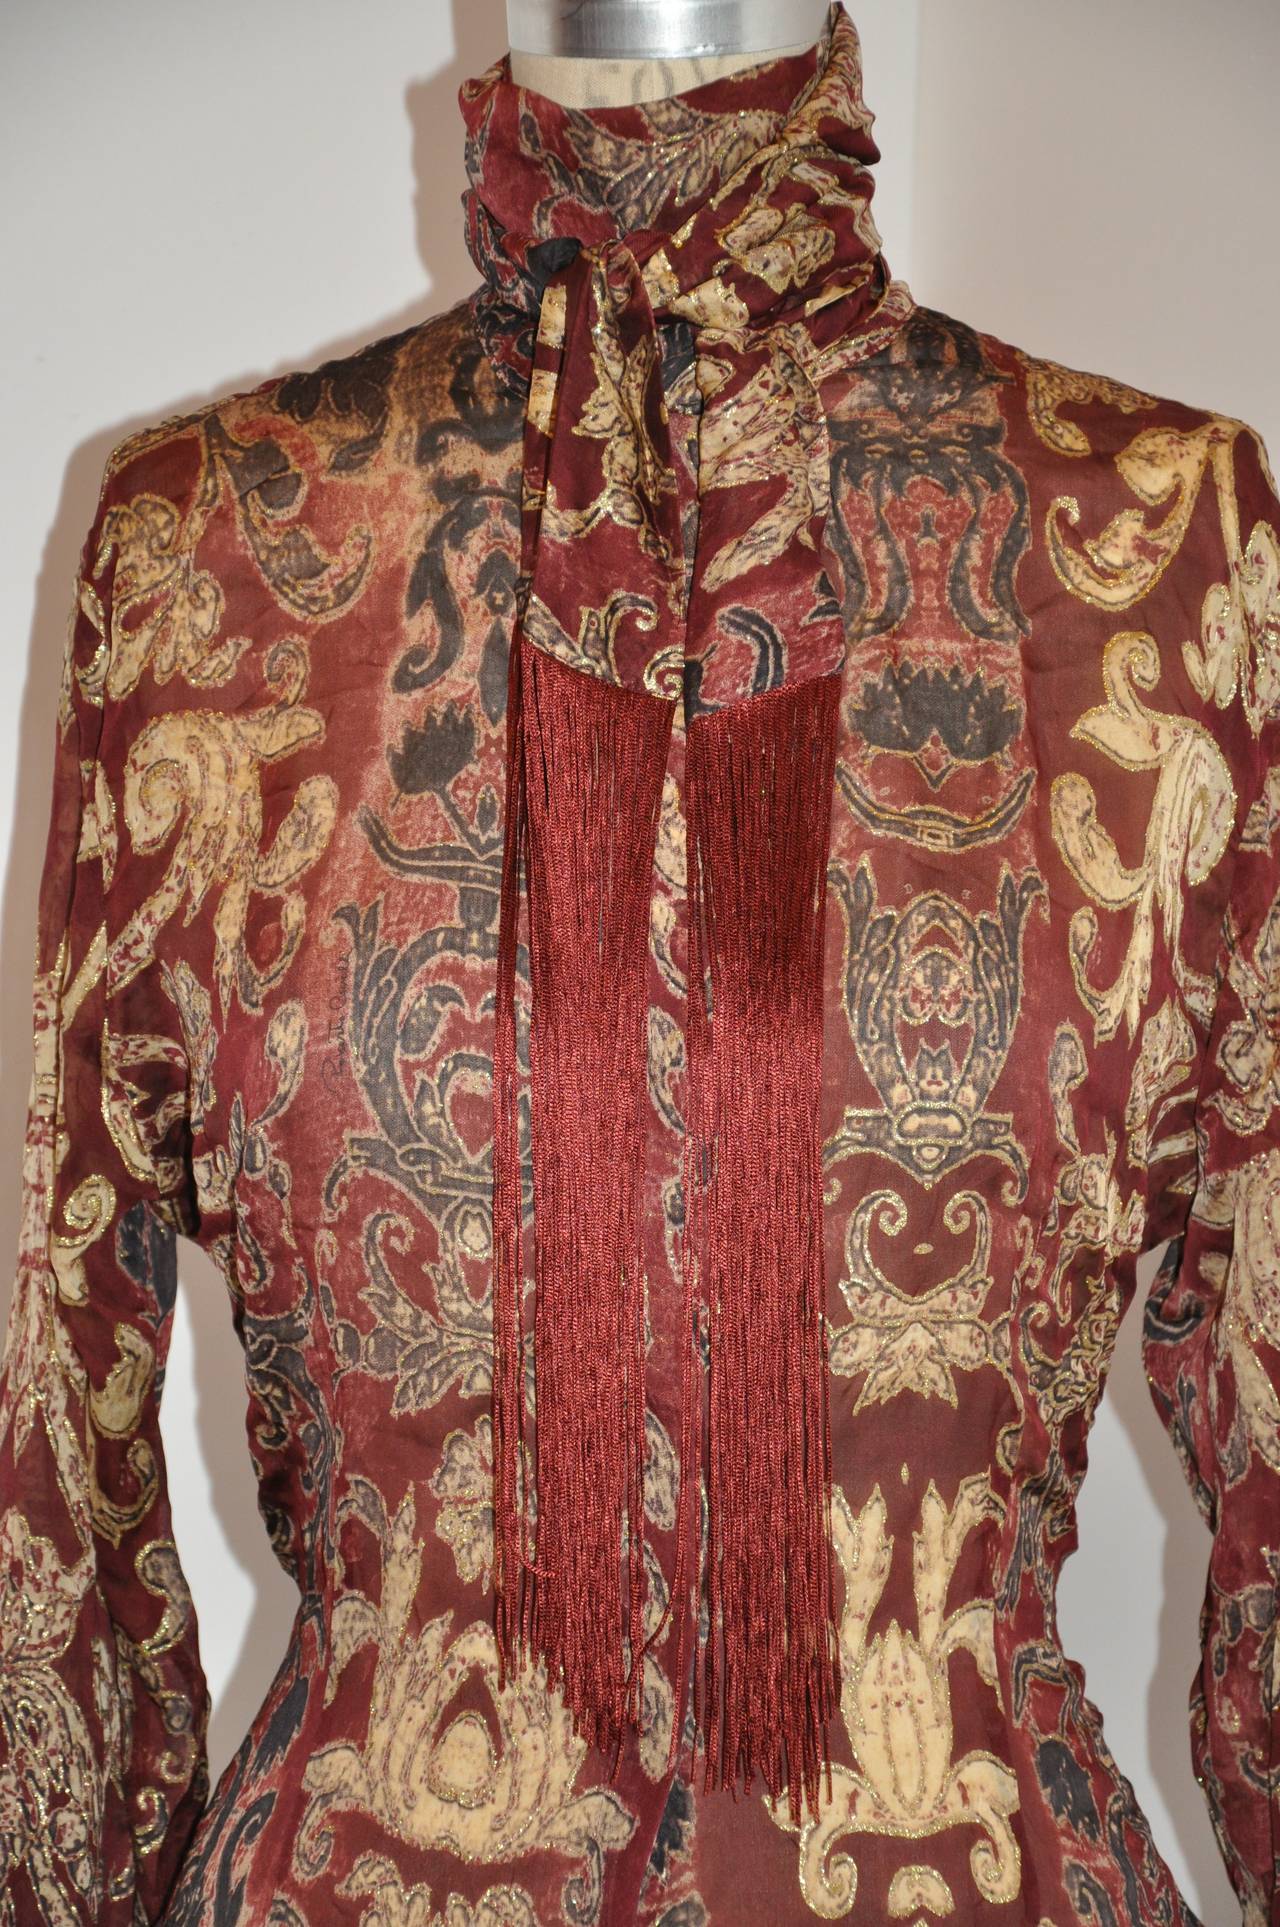 Roberto Cavalli silk chiffon blouse is etched throughout with gold lame. The collar, which stands at 3 5/8